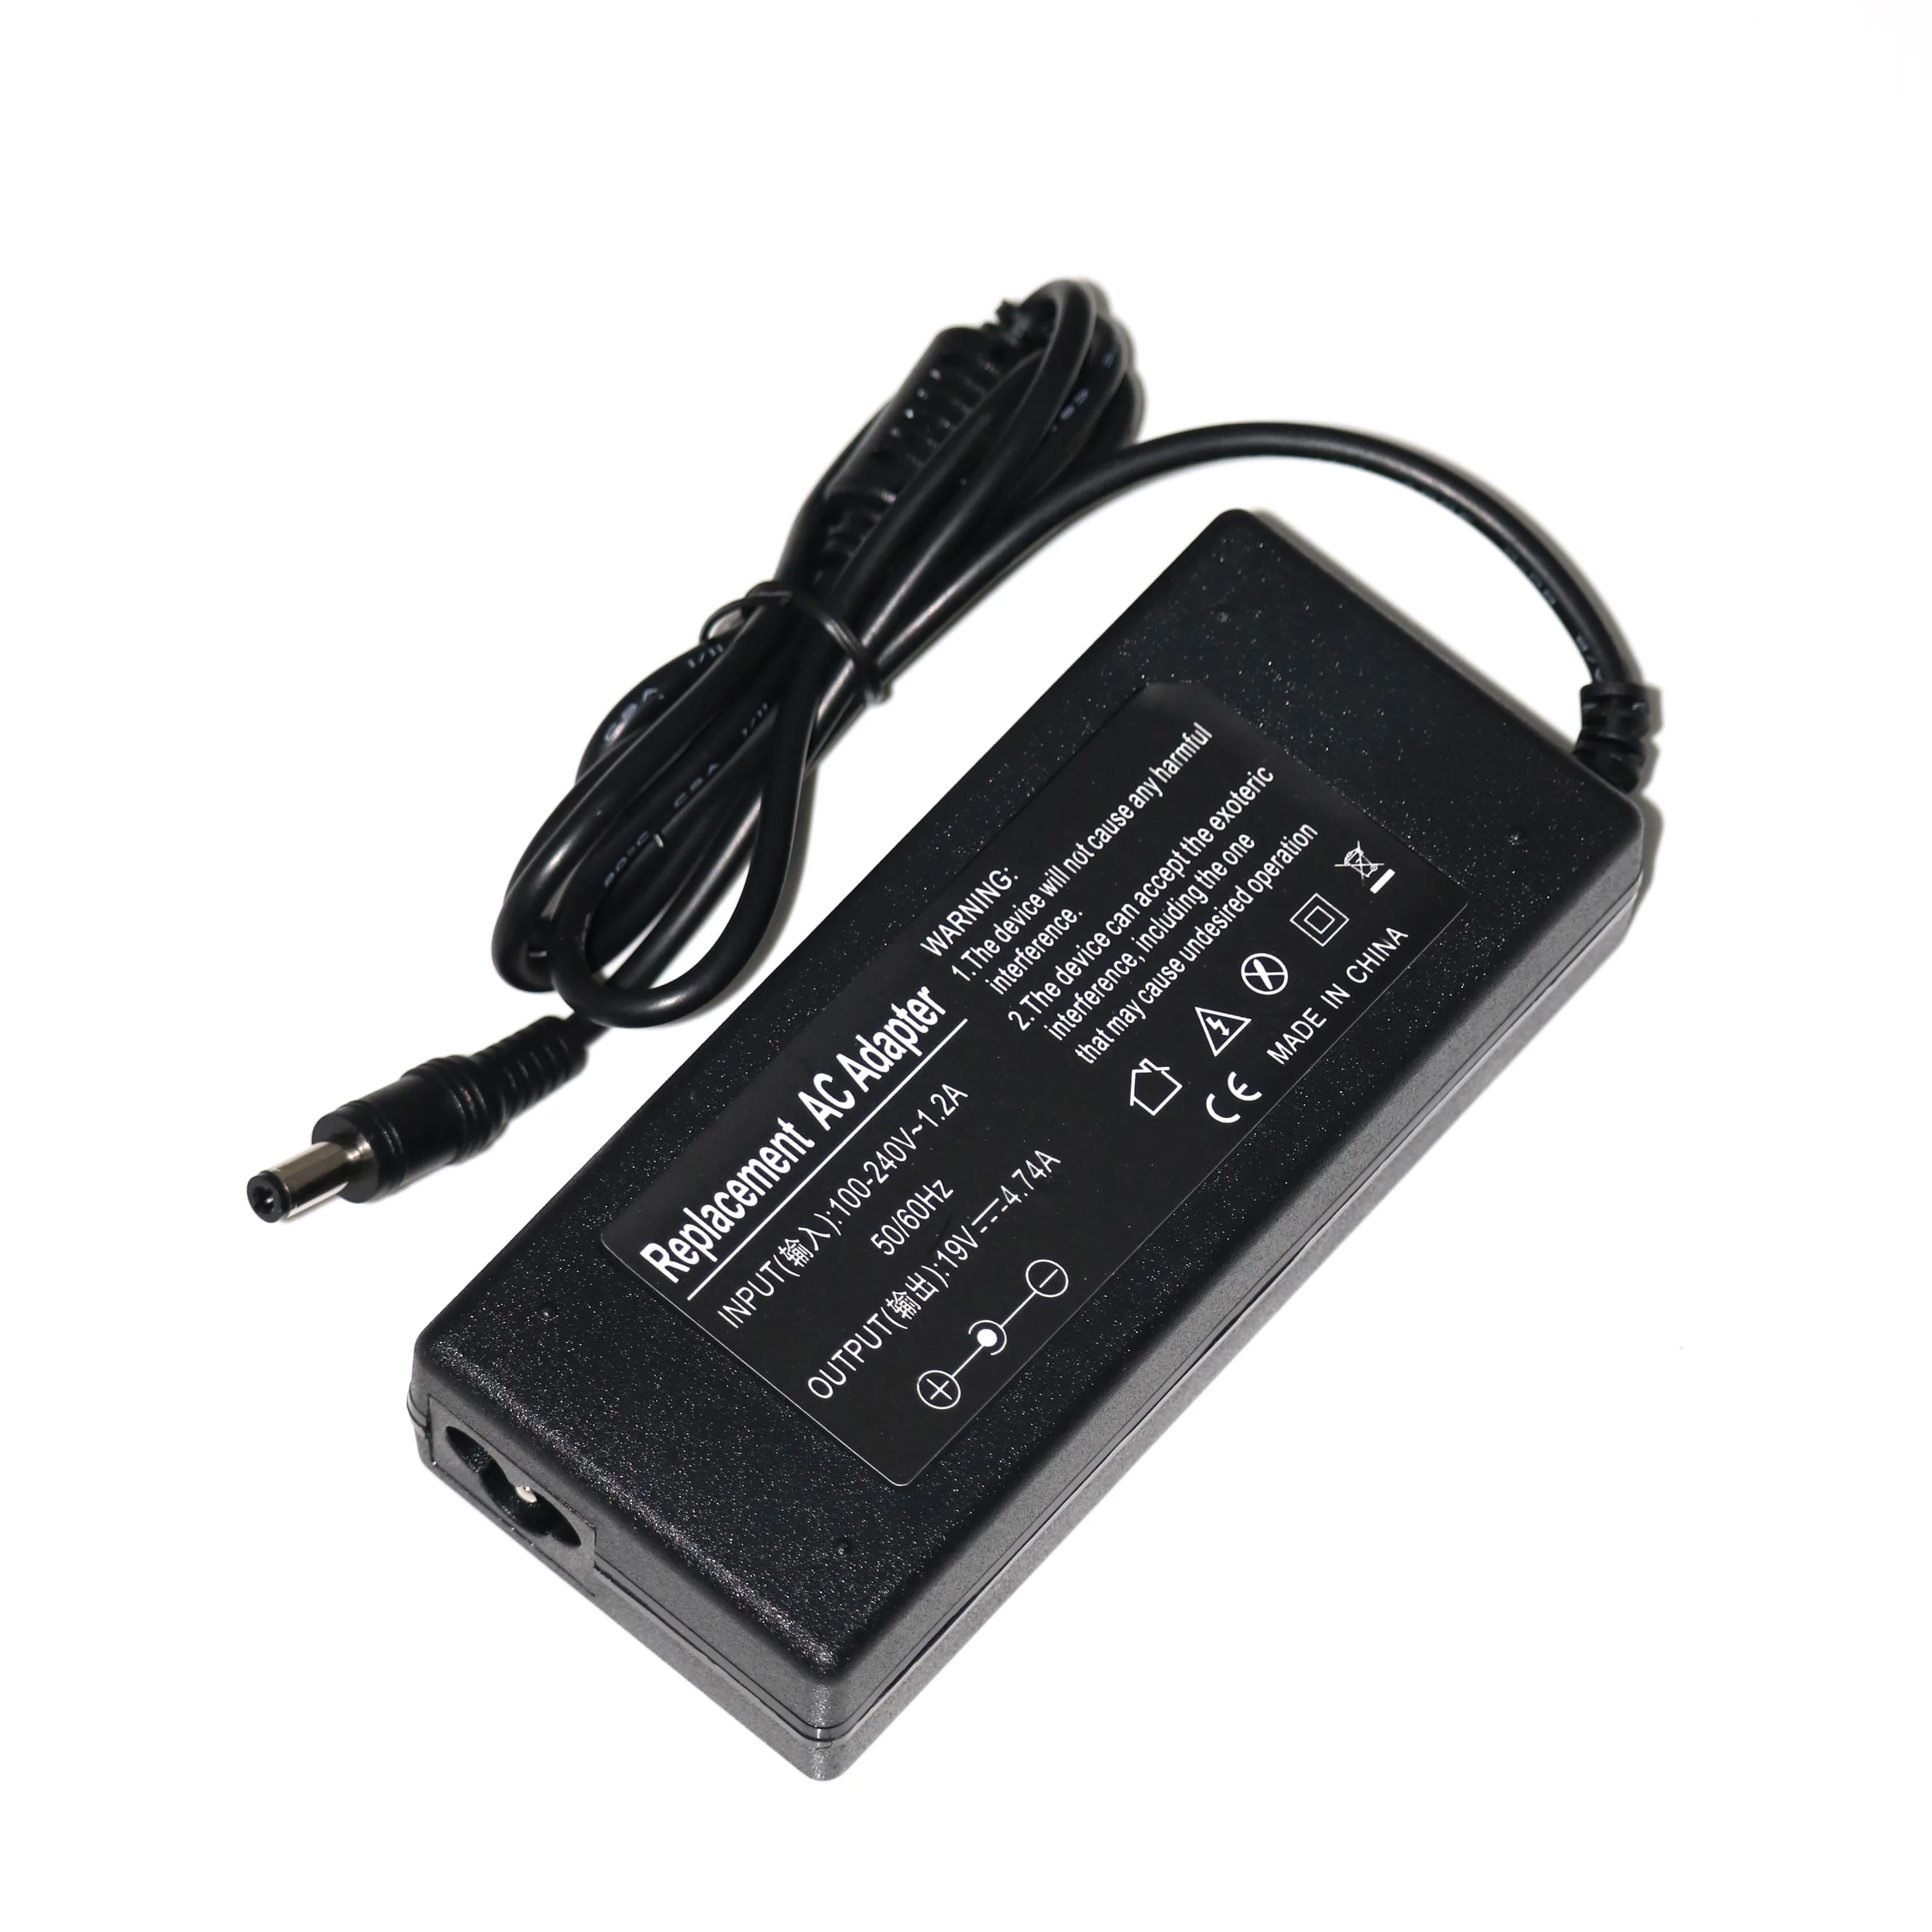 

19V 4.74A 90W 5.5x2.5mm AC Power Supply Notebook Adapter Charger For ASUS Laptop A46C X43B A8J K52 U1 U3 S5 W3 W7 Z3 For Toshiba